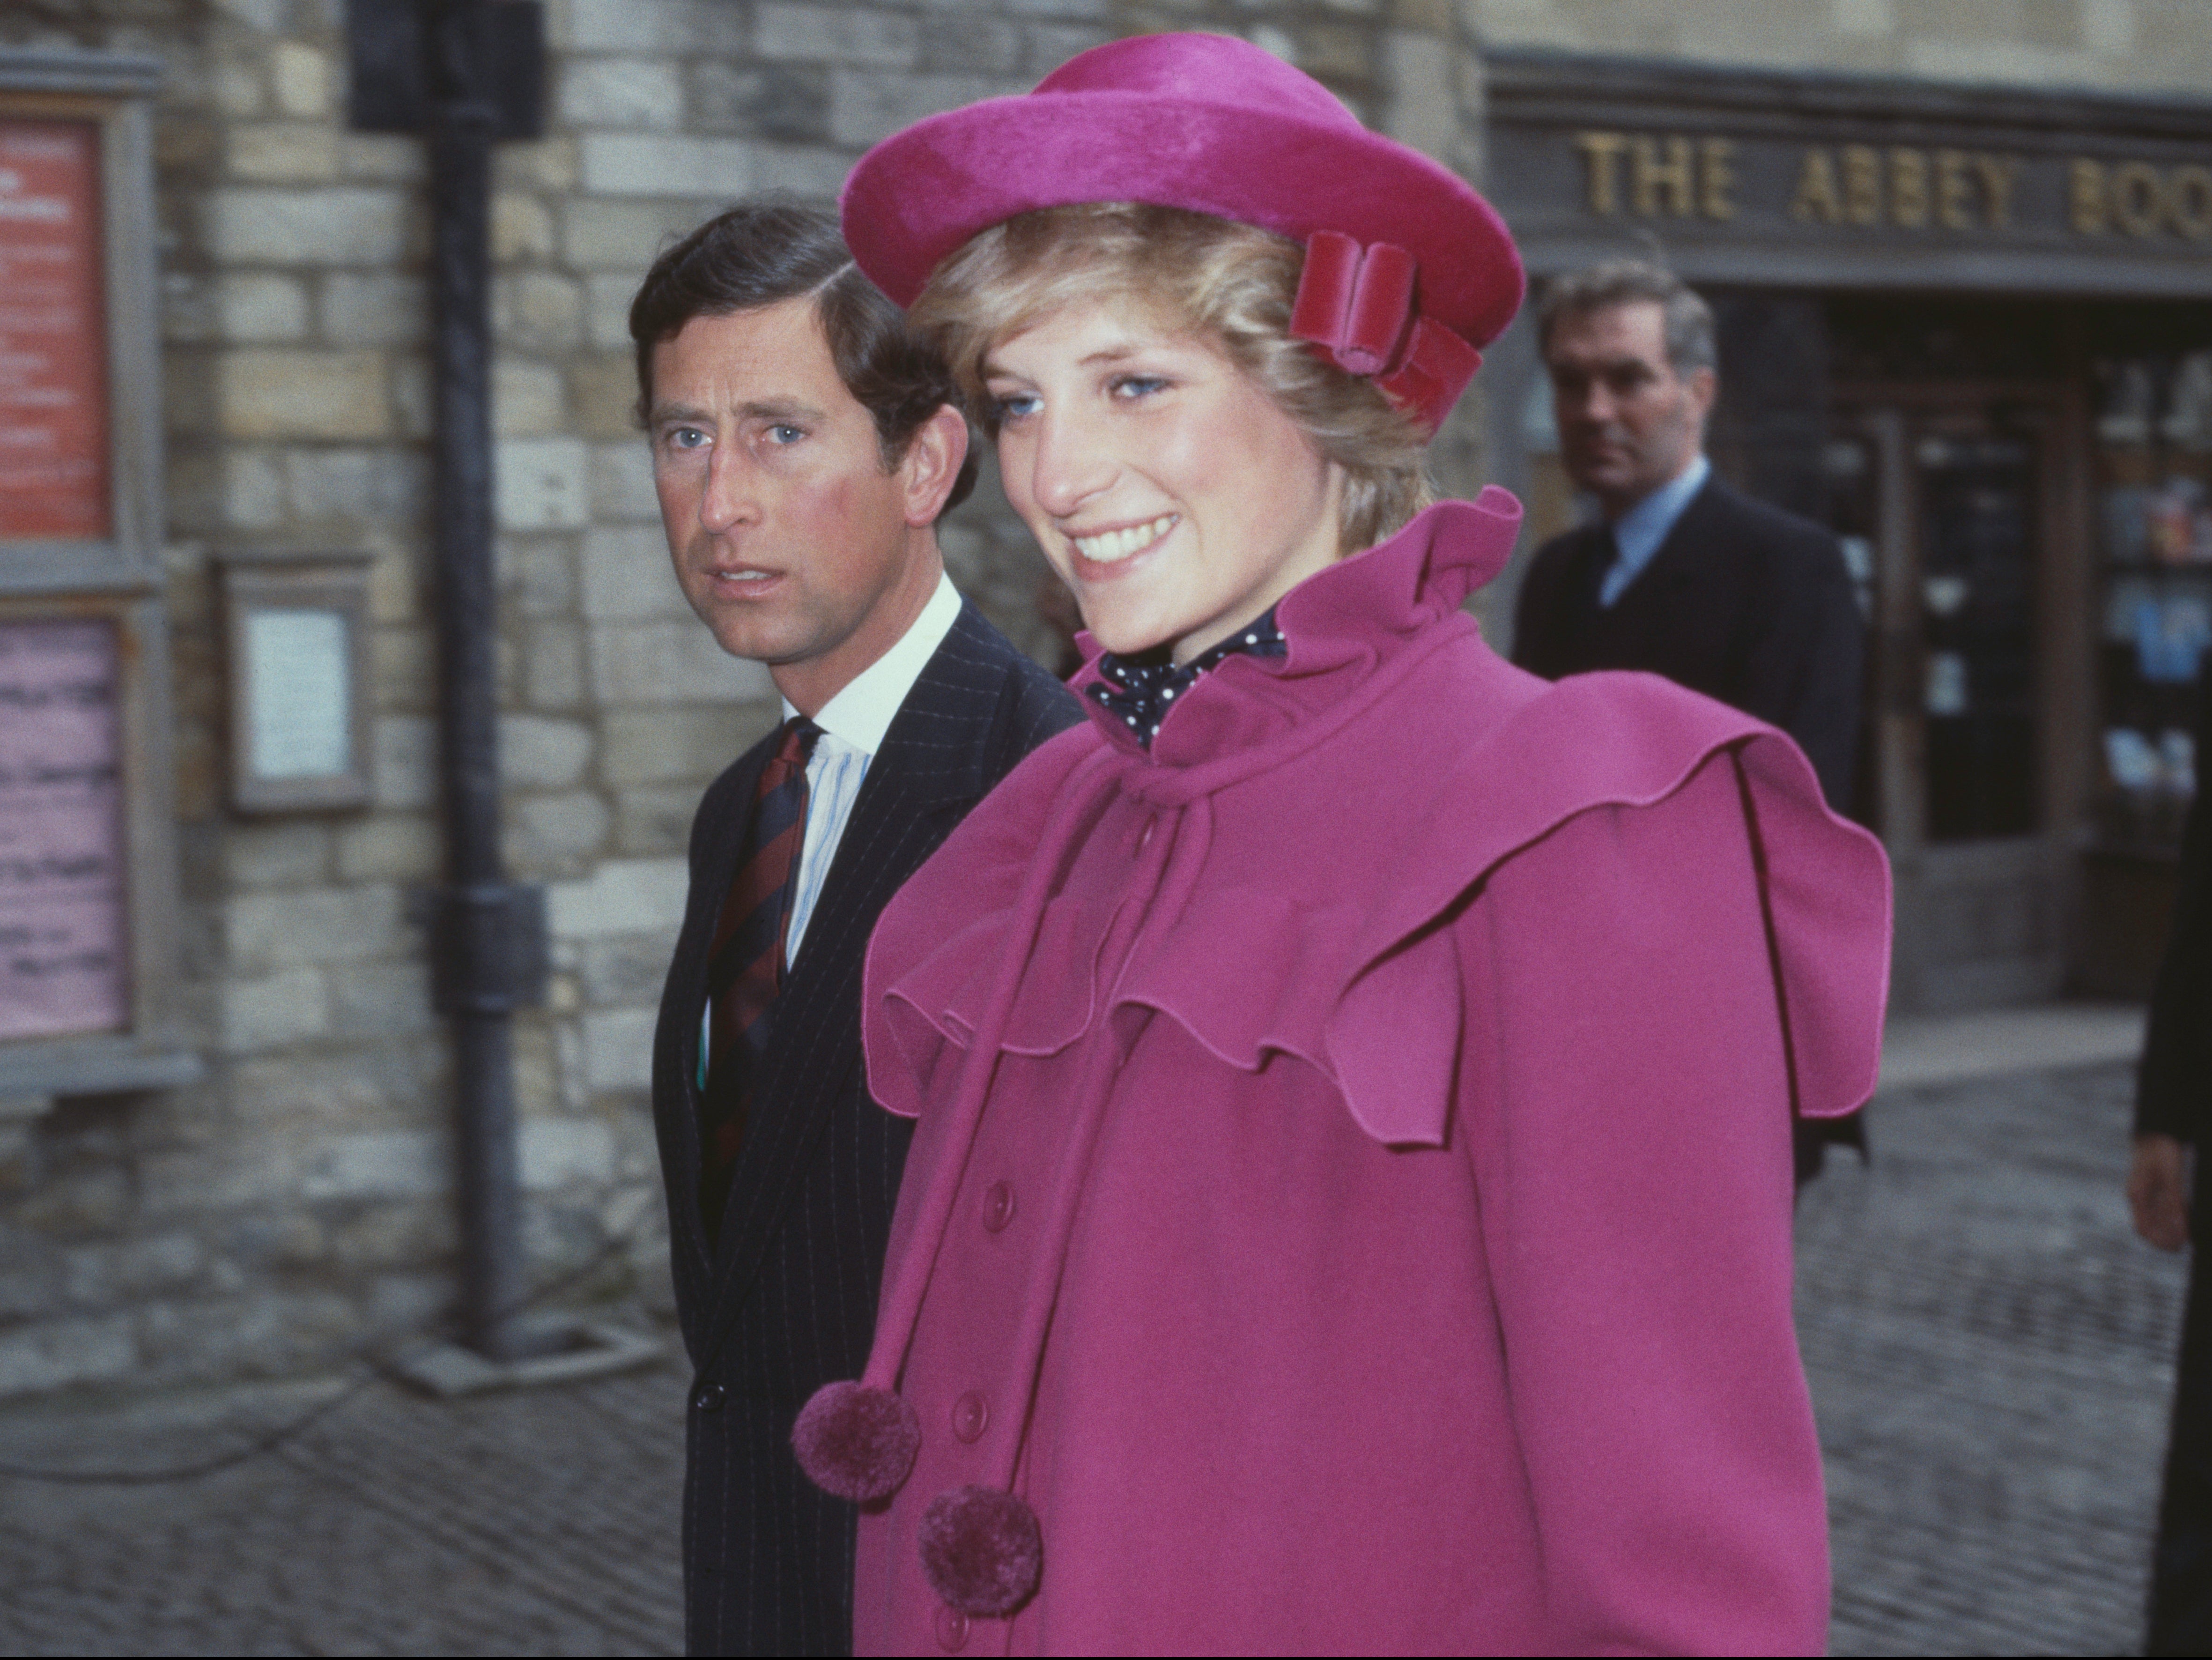 Princess Diana laid bare her failed marriage to Prince Charles during the now famous Panorama interview in 1995